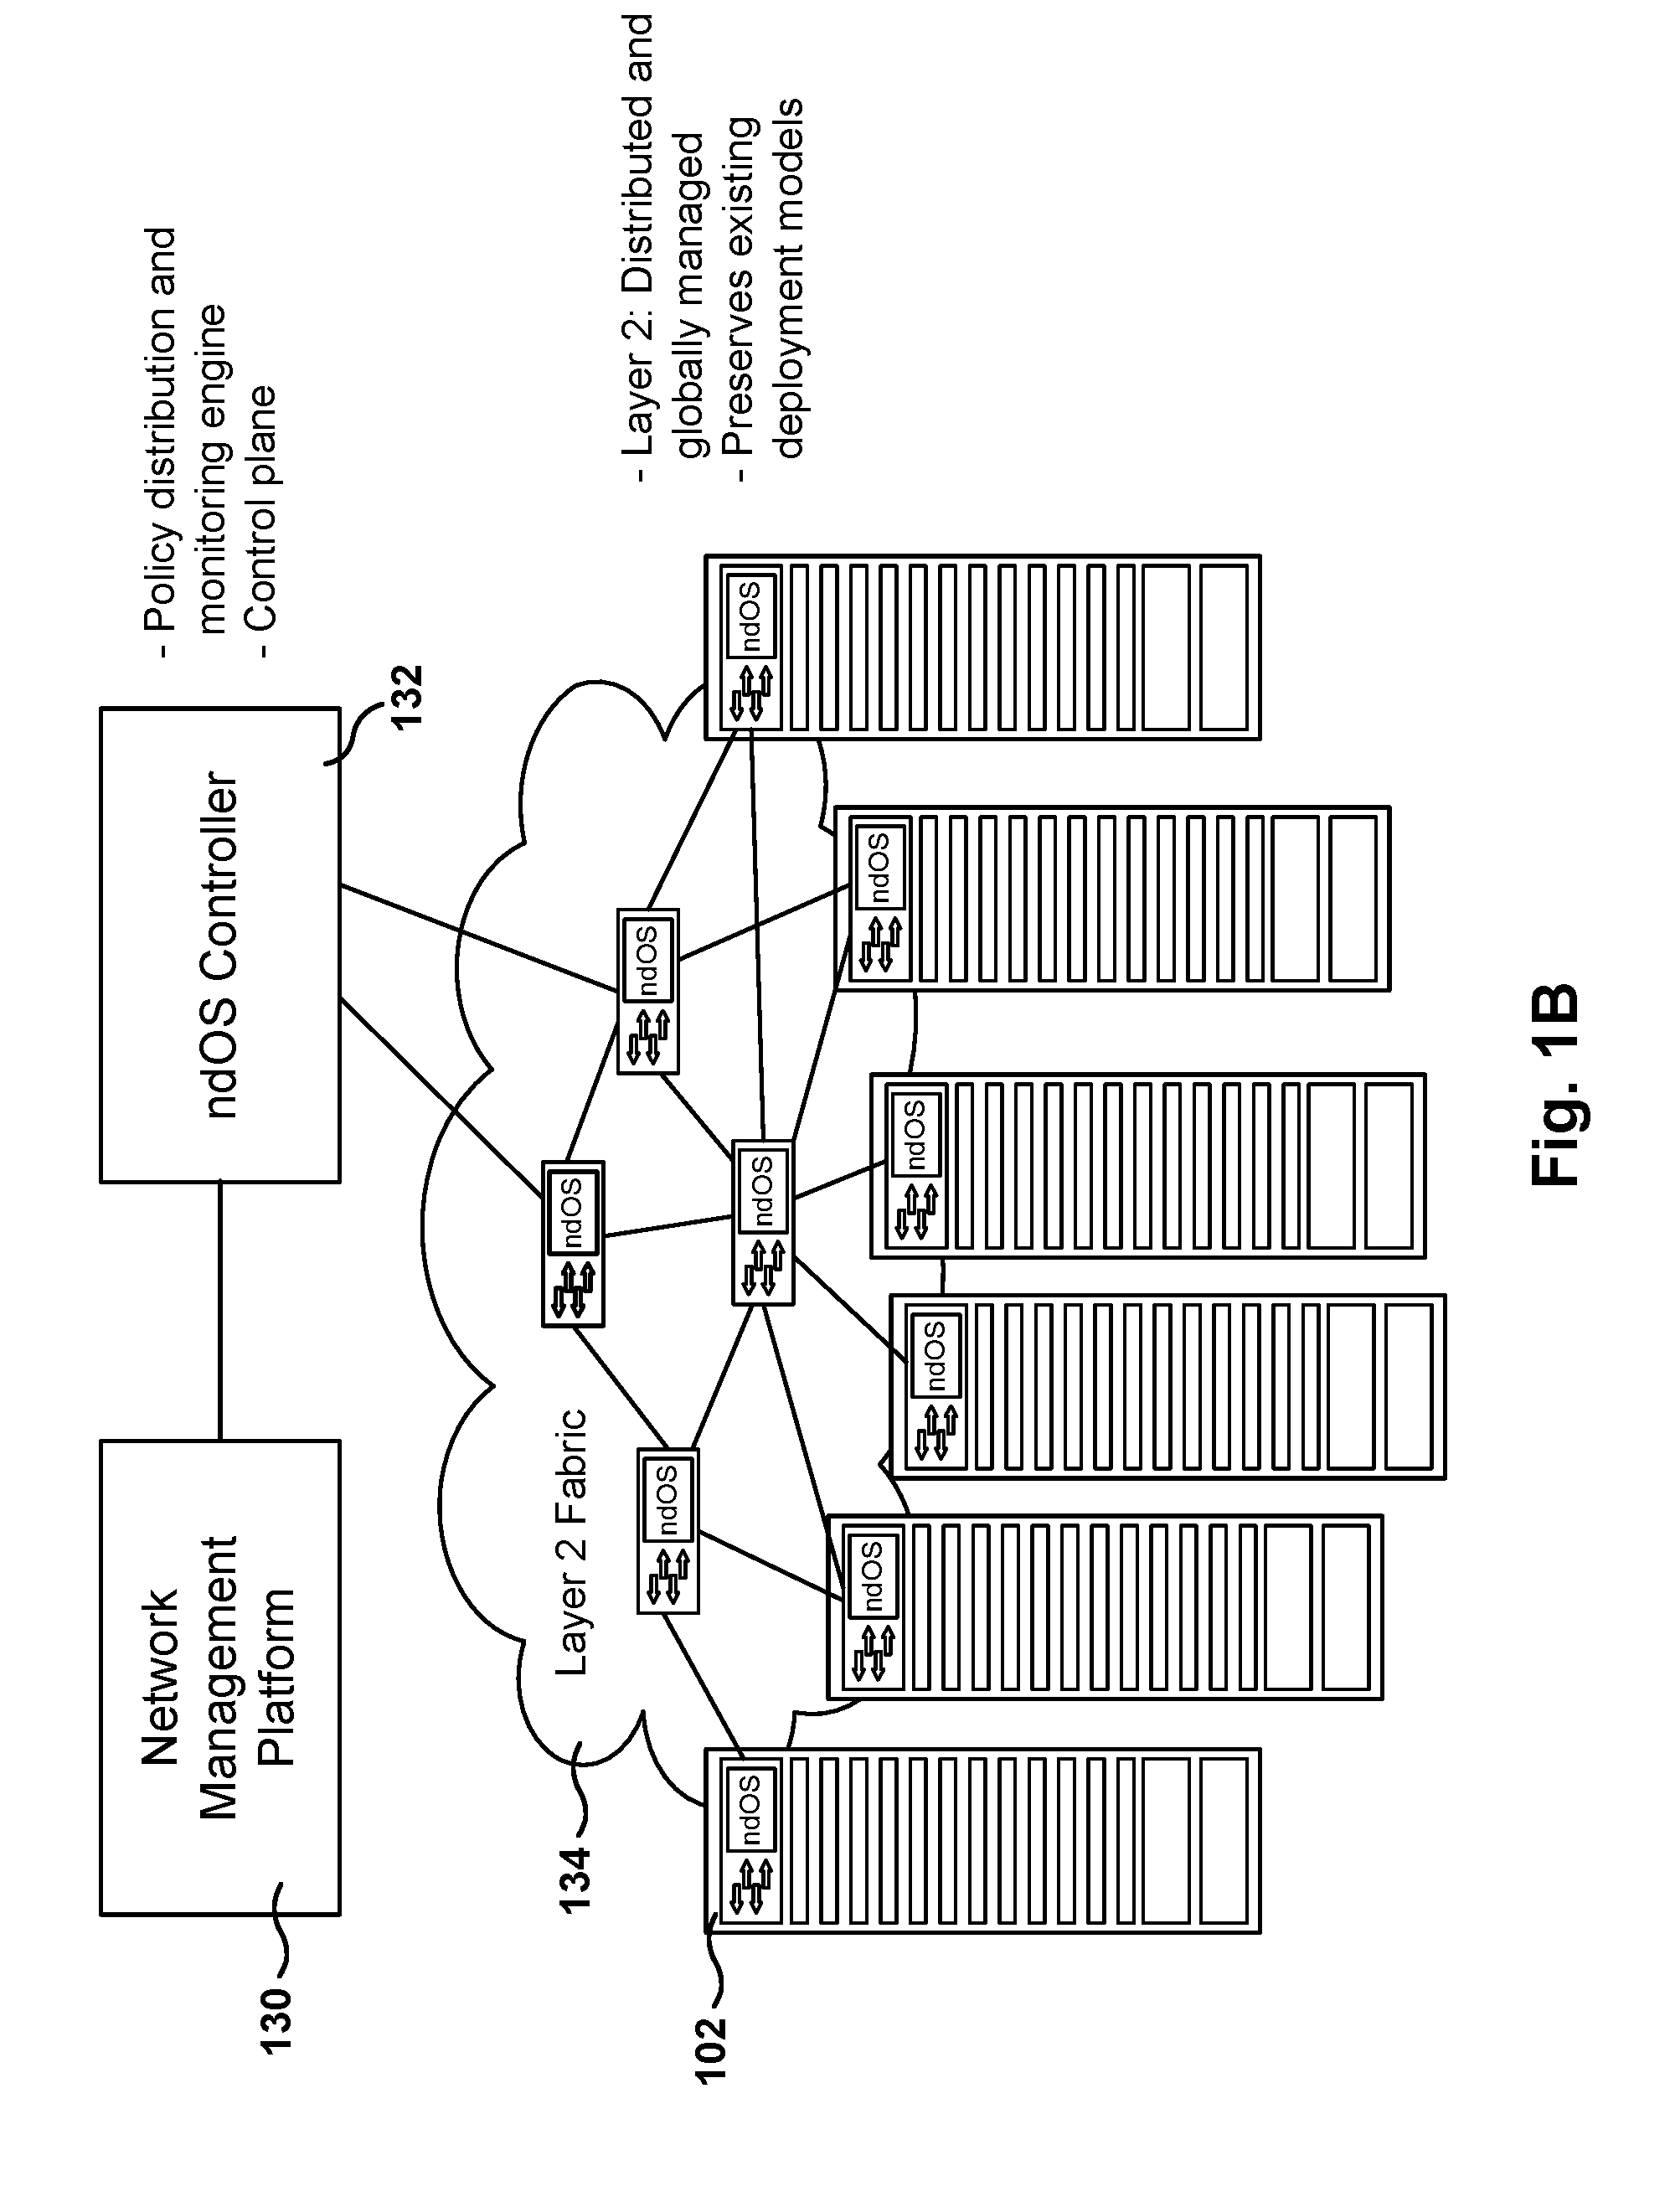 Integrated server with switching capabilities and network operating system